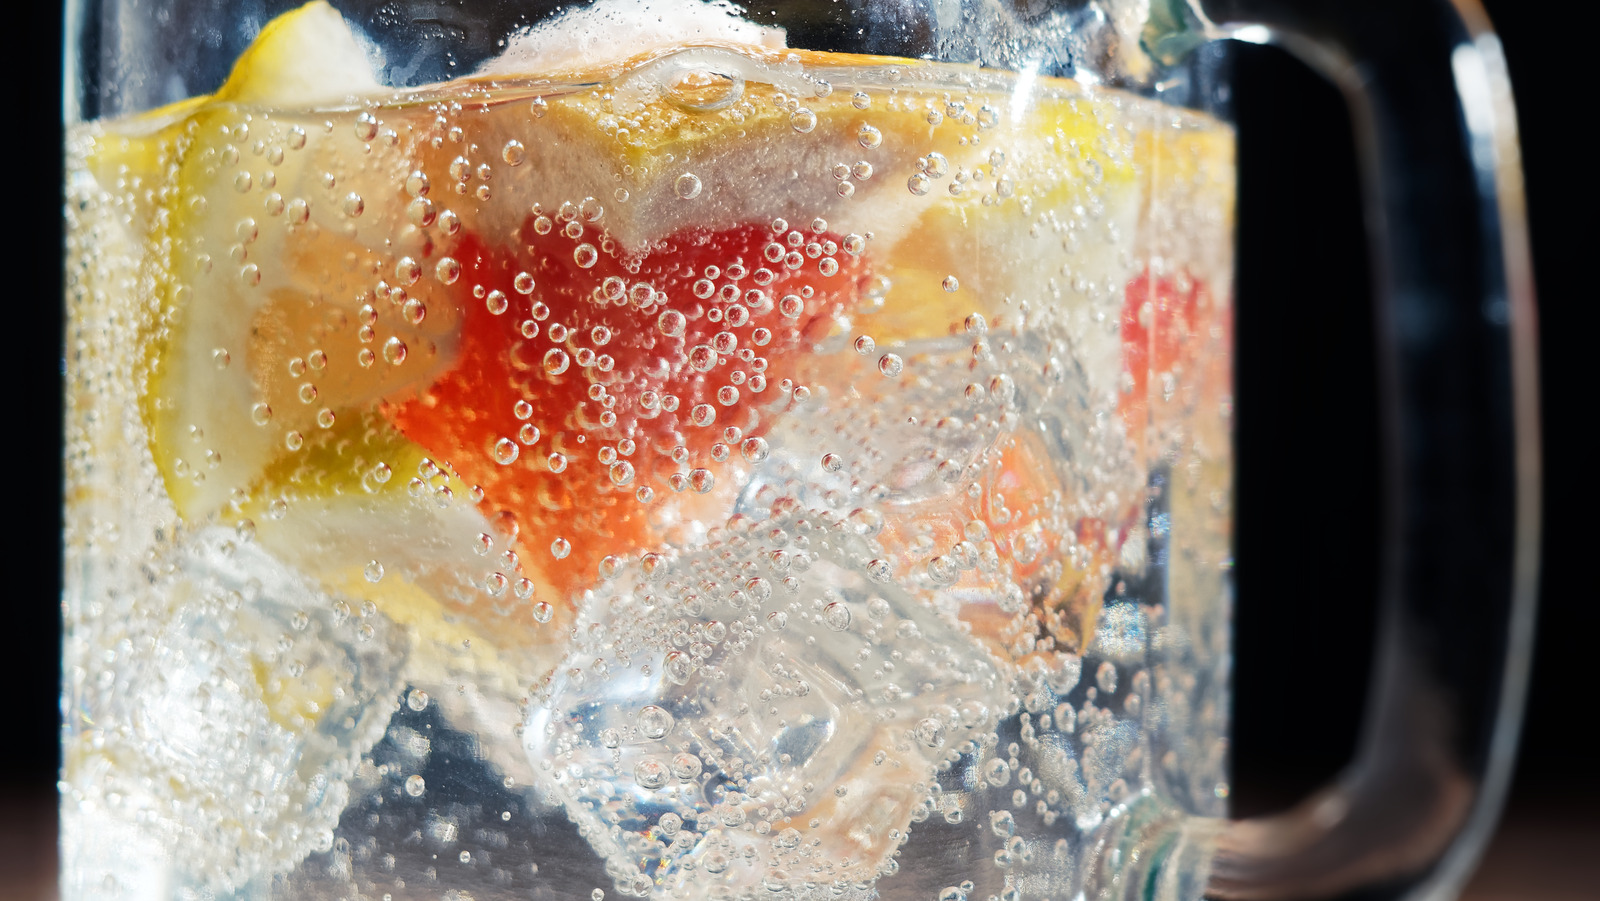 Ice Matters: How to Choose It for Cocktails